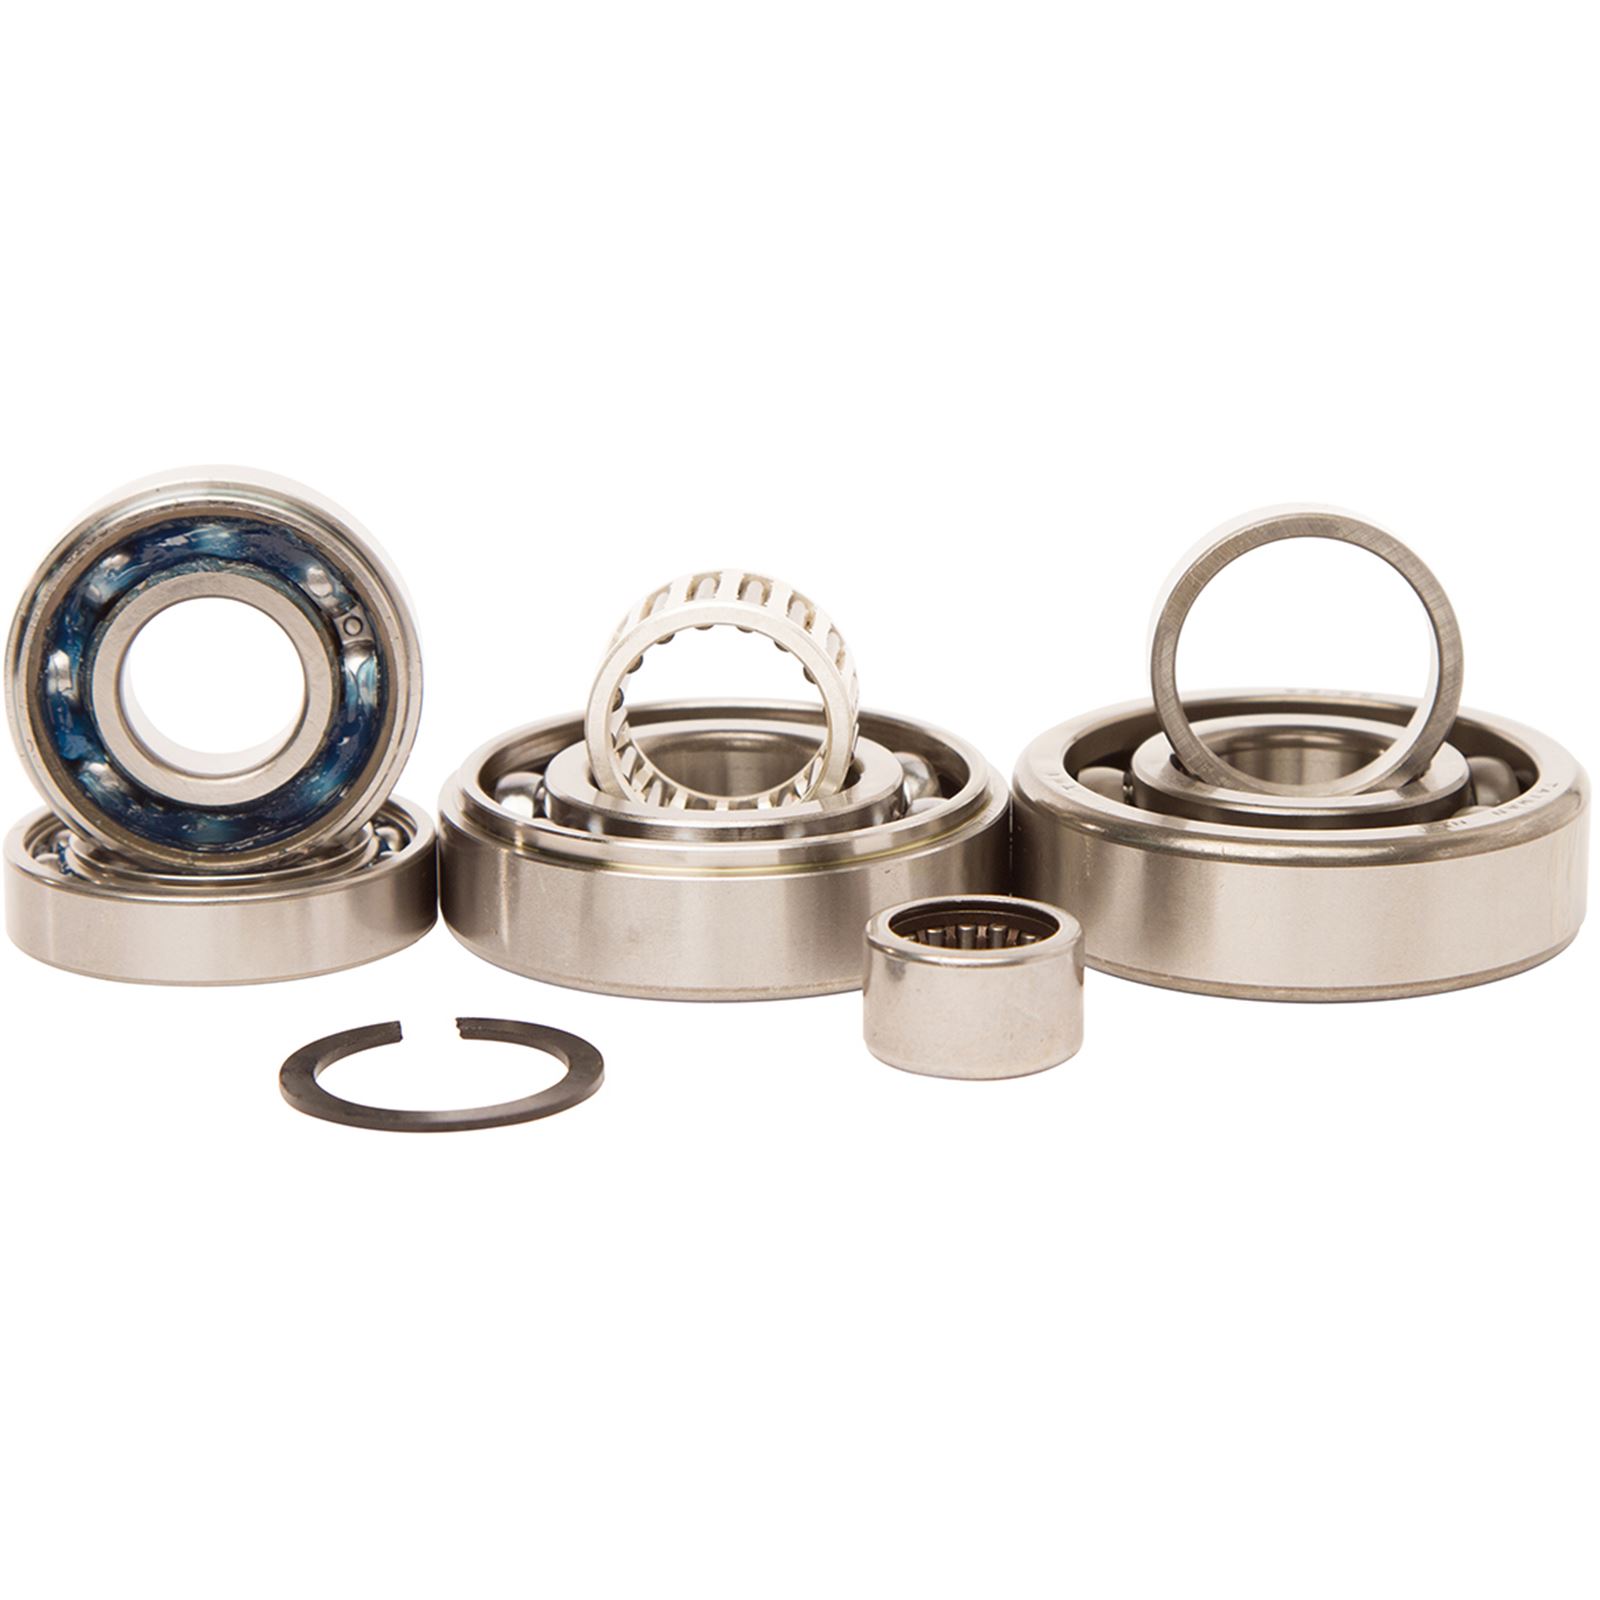 Hot Rods Transmission Bearing Kit Motorcycle, ATV UTV  Powersports  Parts The Best Powersports, Motorcycle, ATV  Snow Gear, Accessories and  More